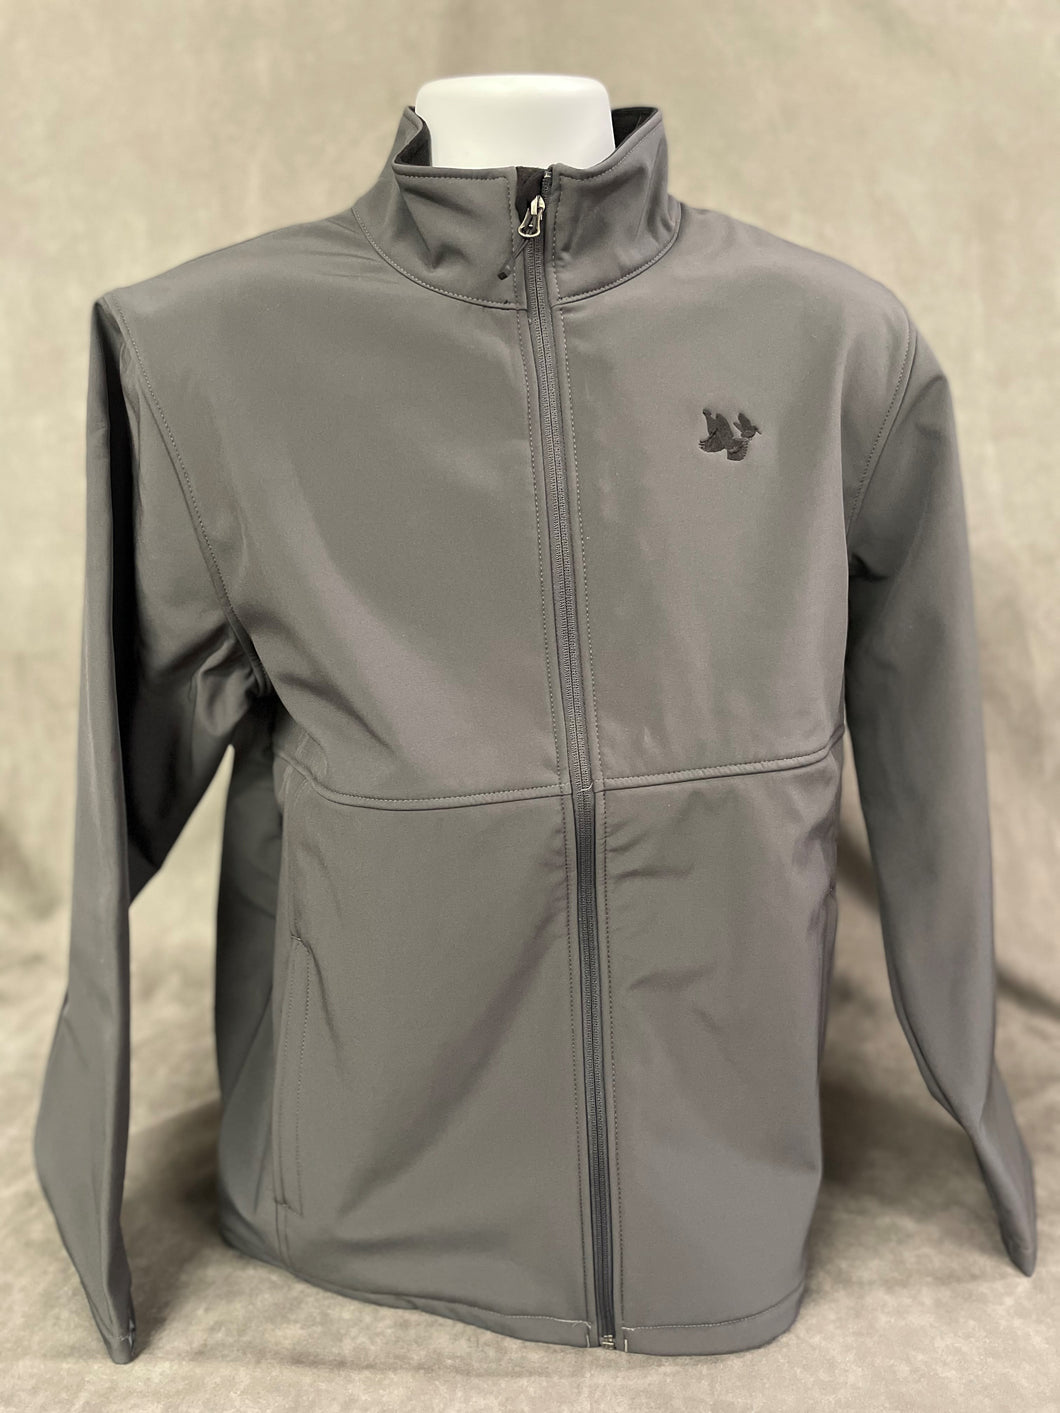 Storm Creek Softshell Jacket: Charcoal with RG/WC Silhouettes